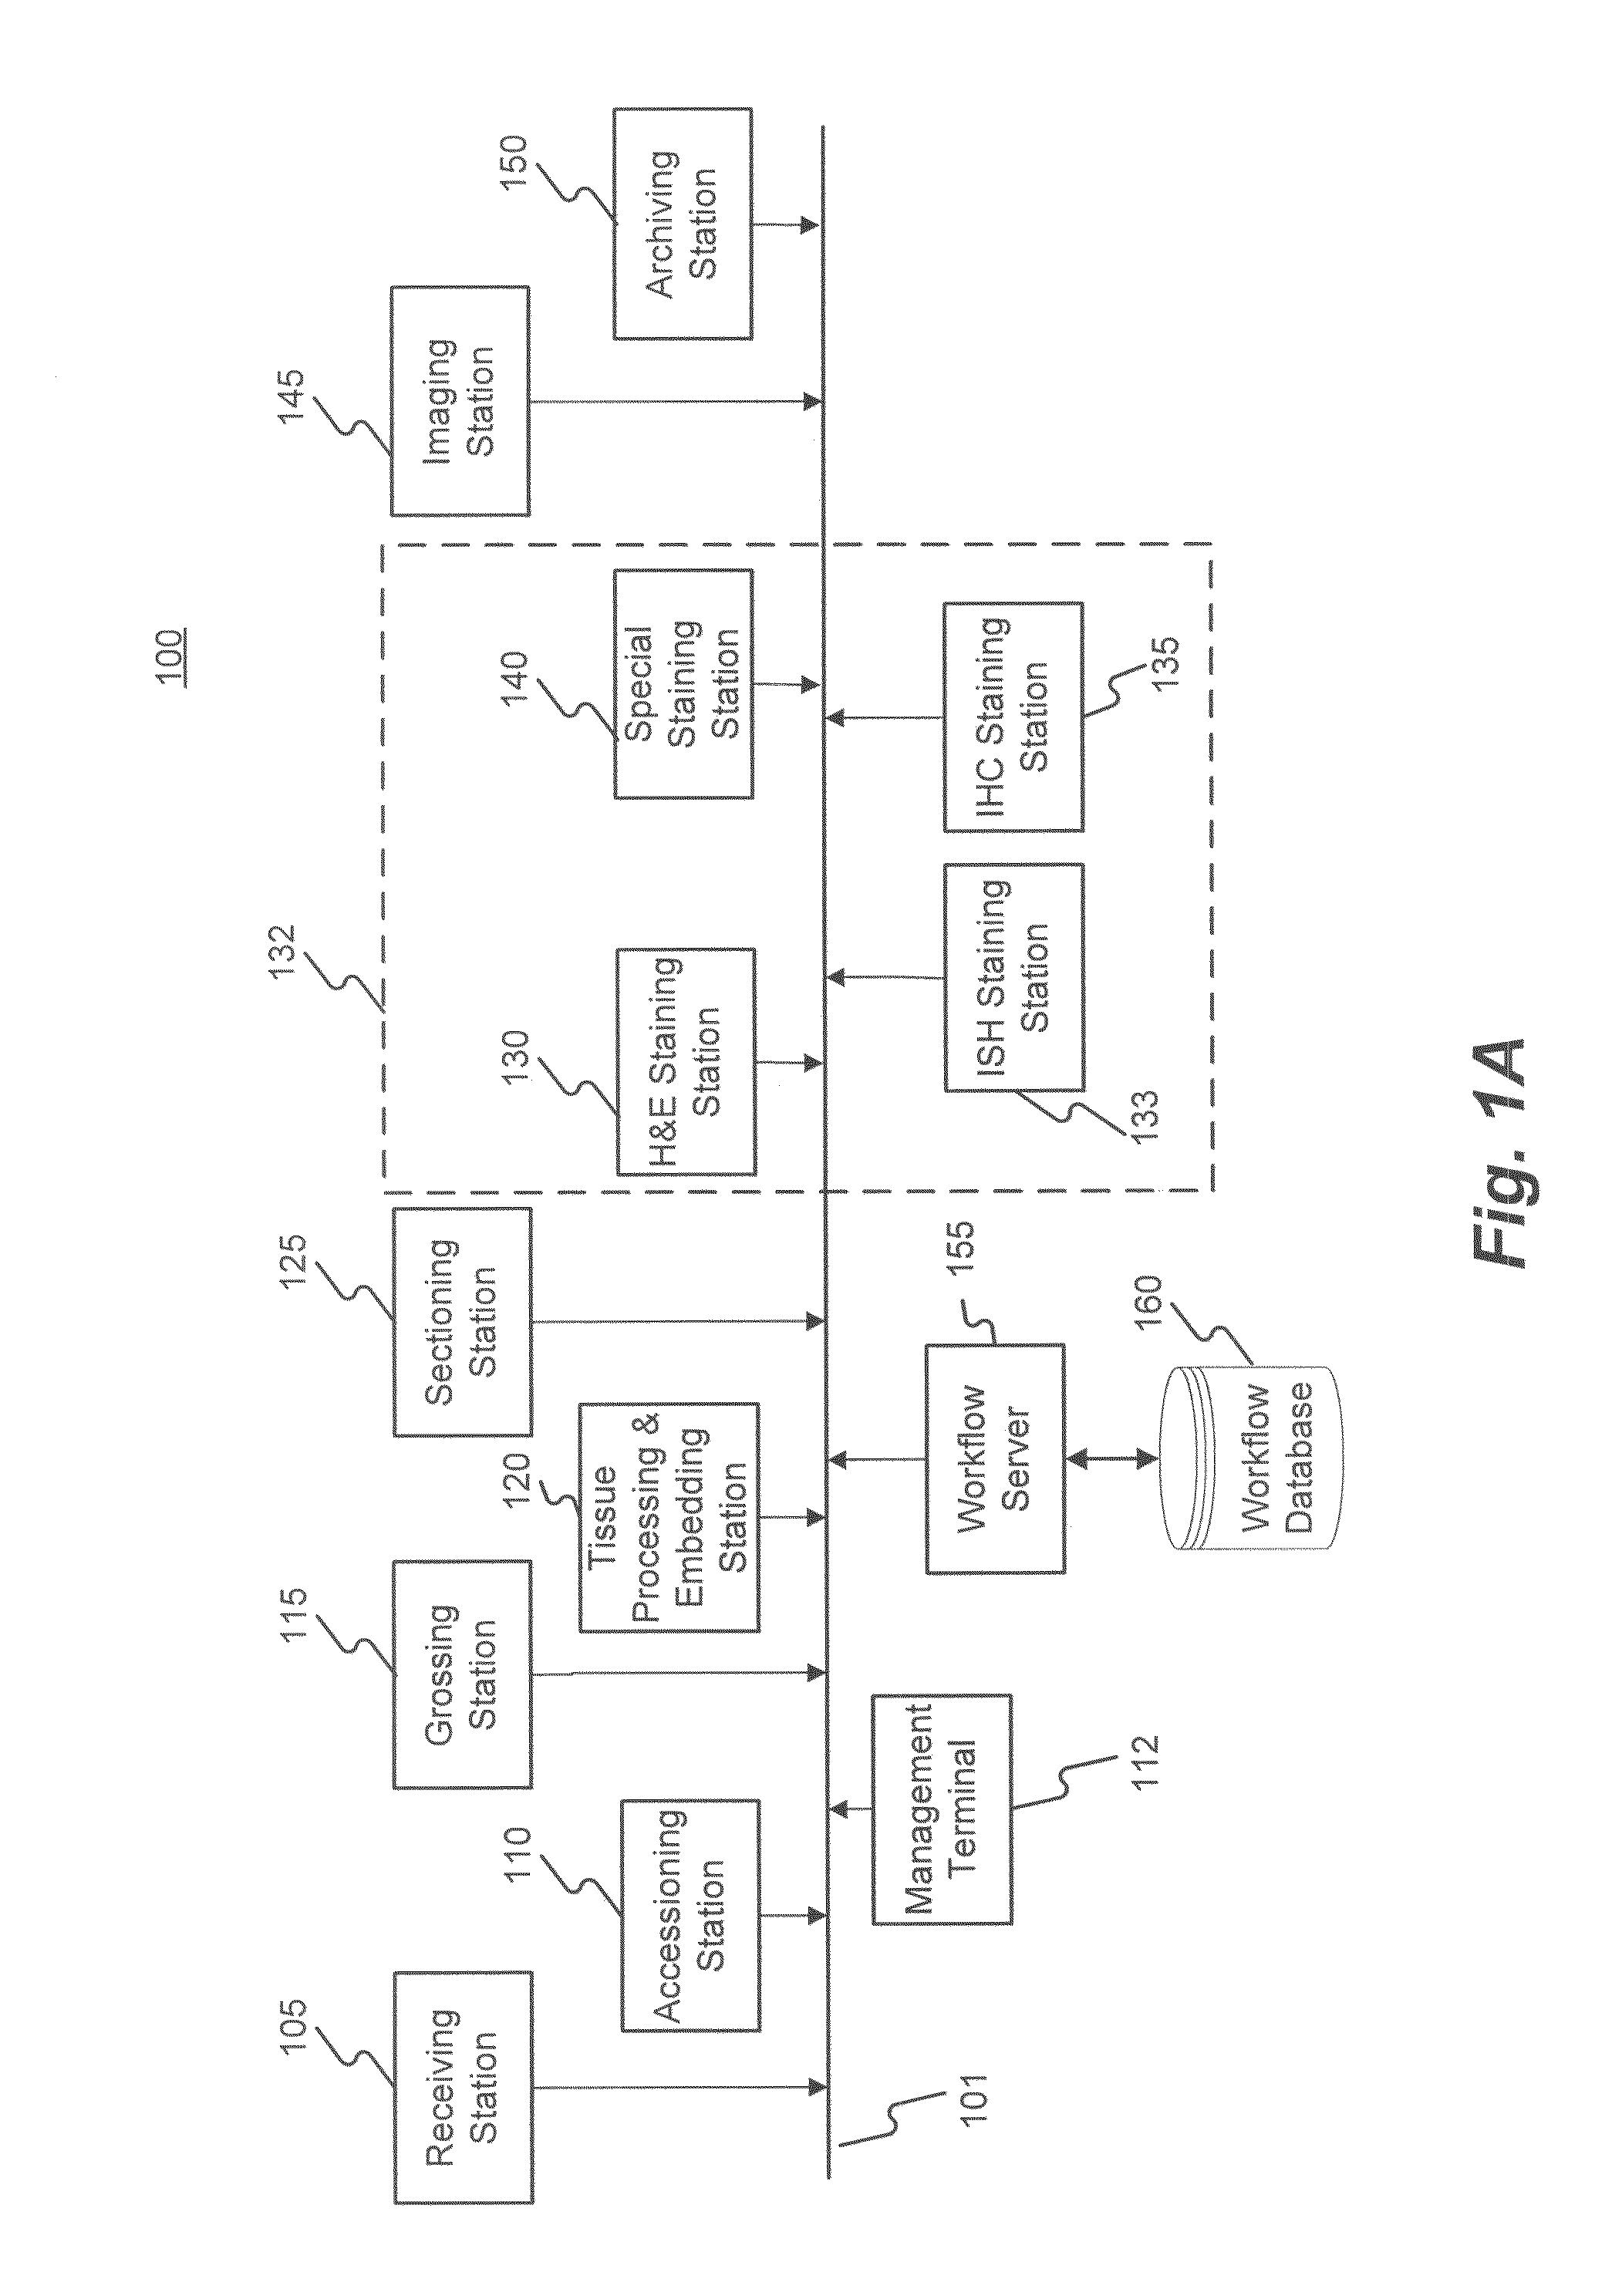 Systems and methods for analyzing workflow associated with a pathology laboratory